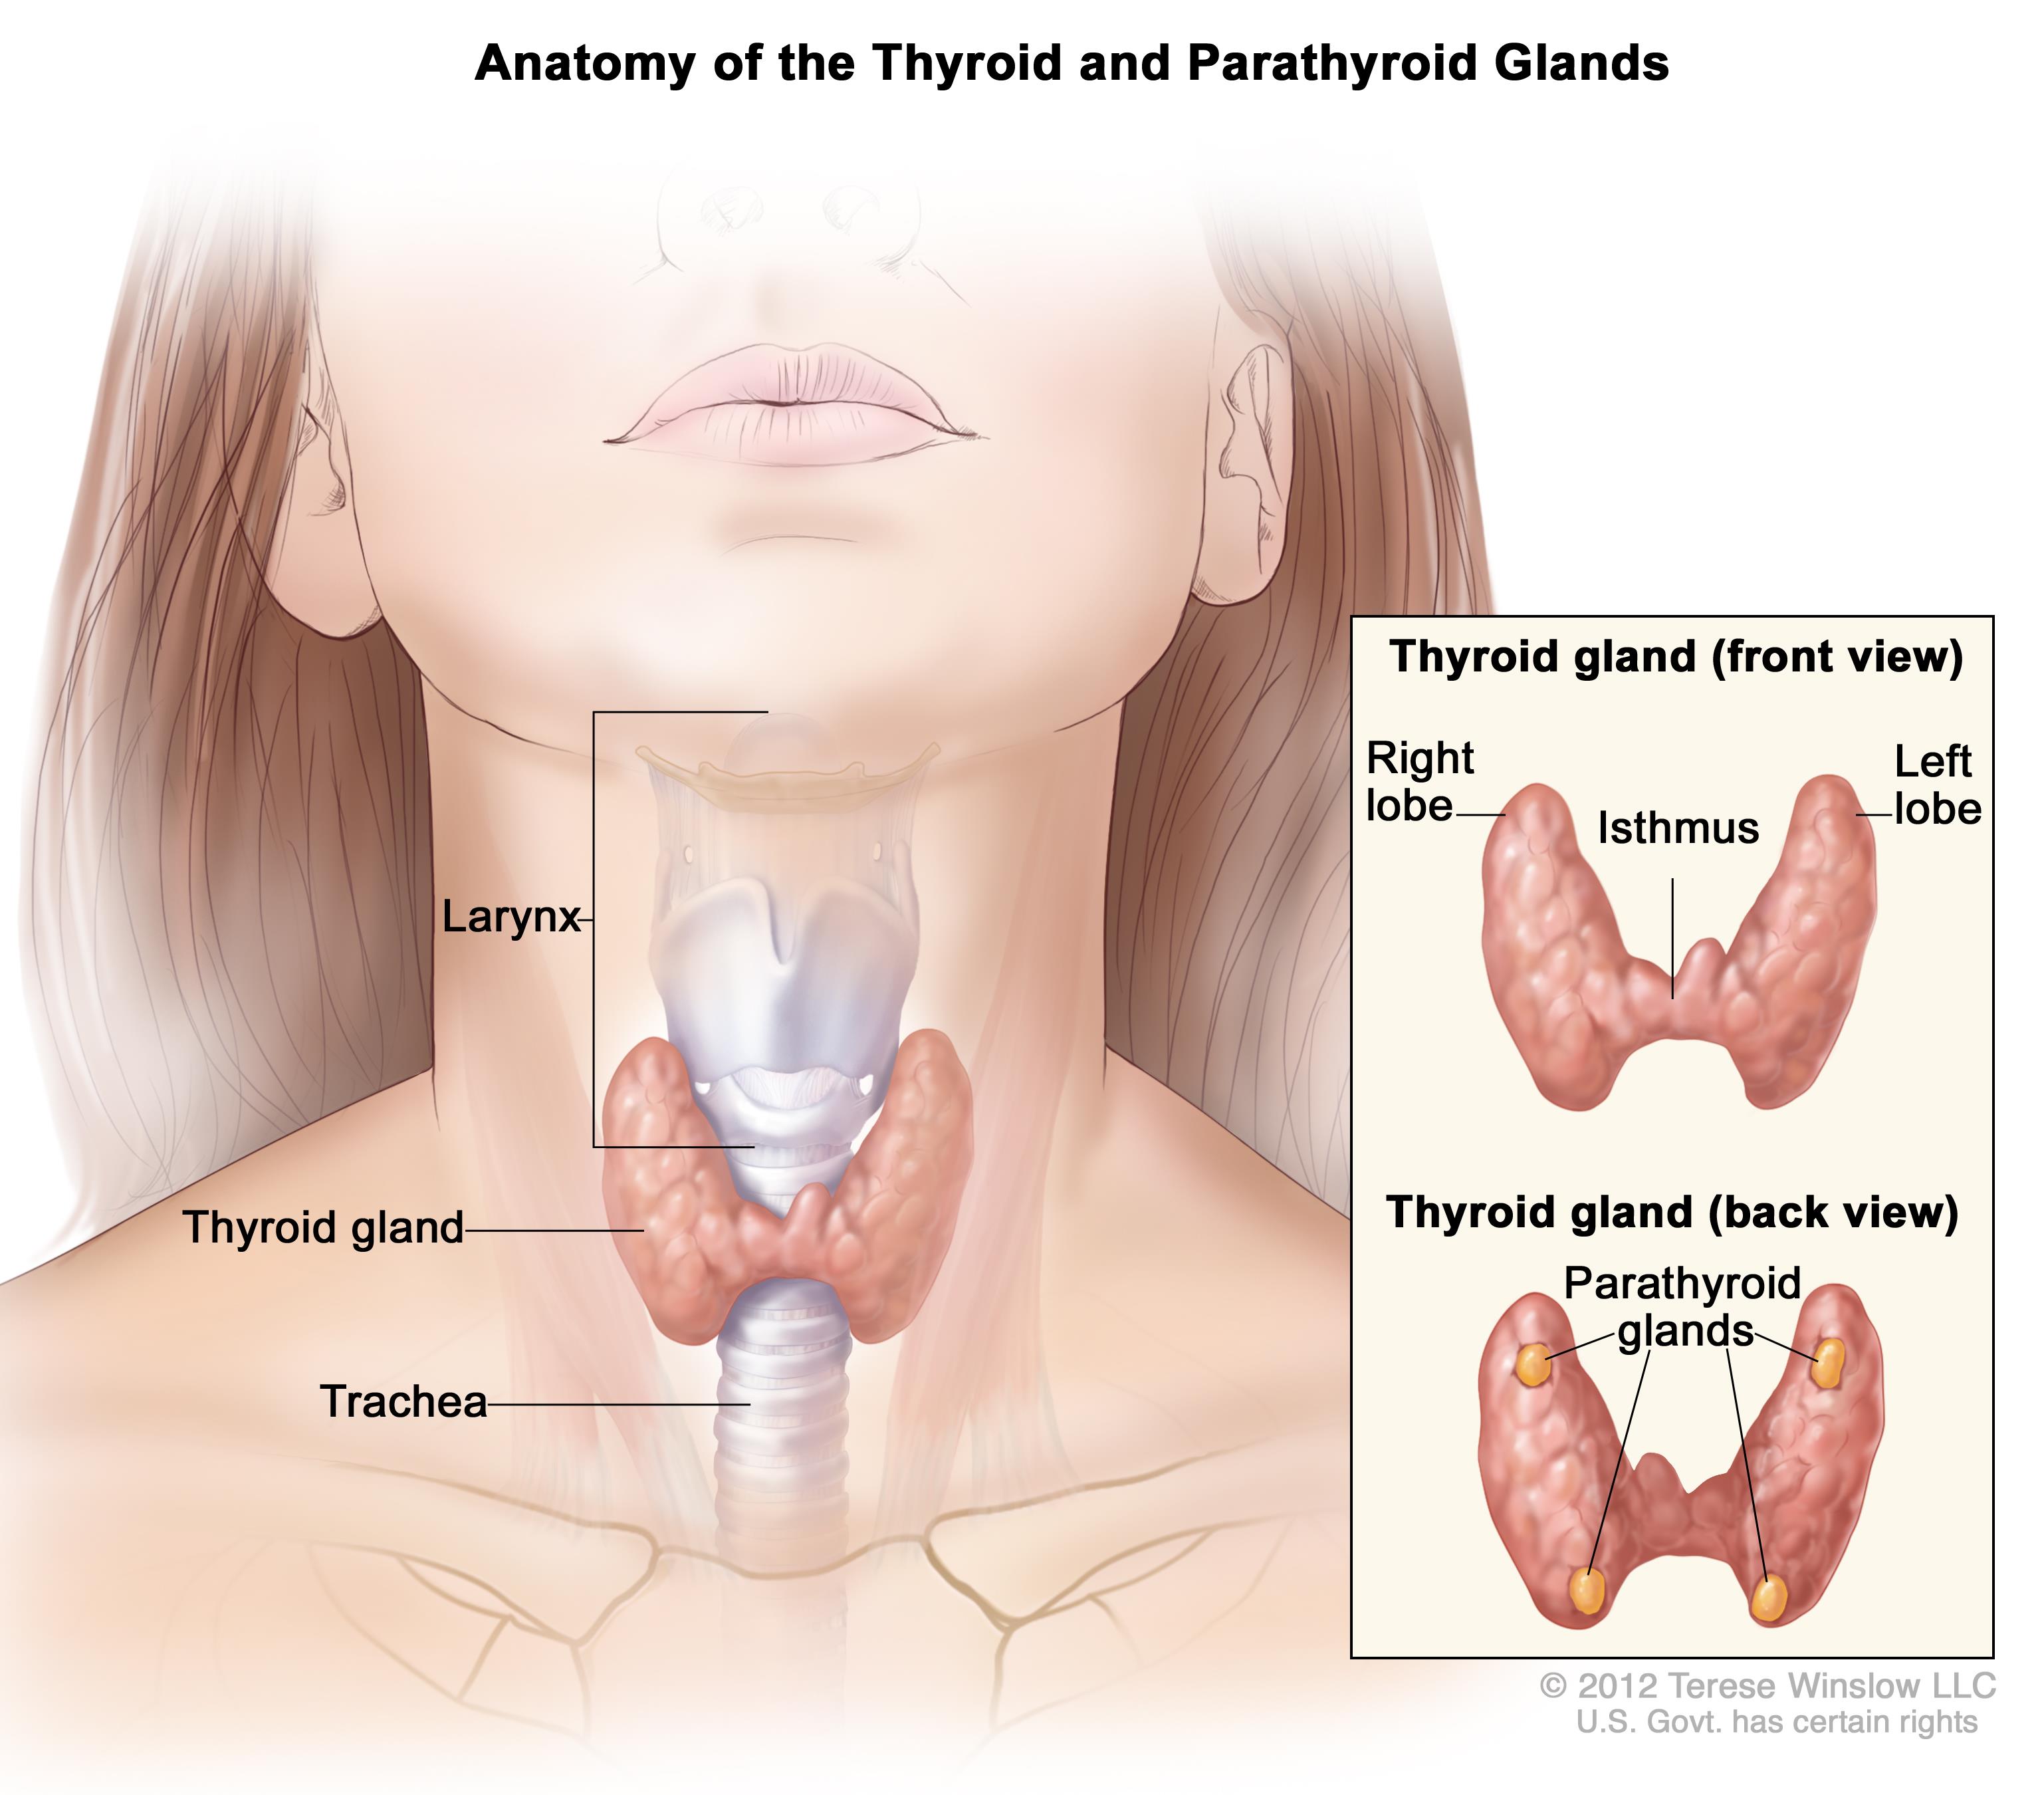 Anatomy of the thyroid and parathyroid glands (source)